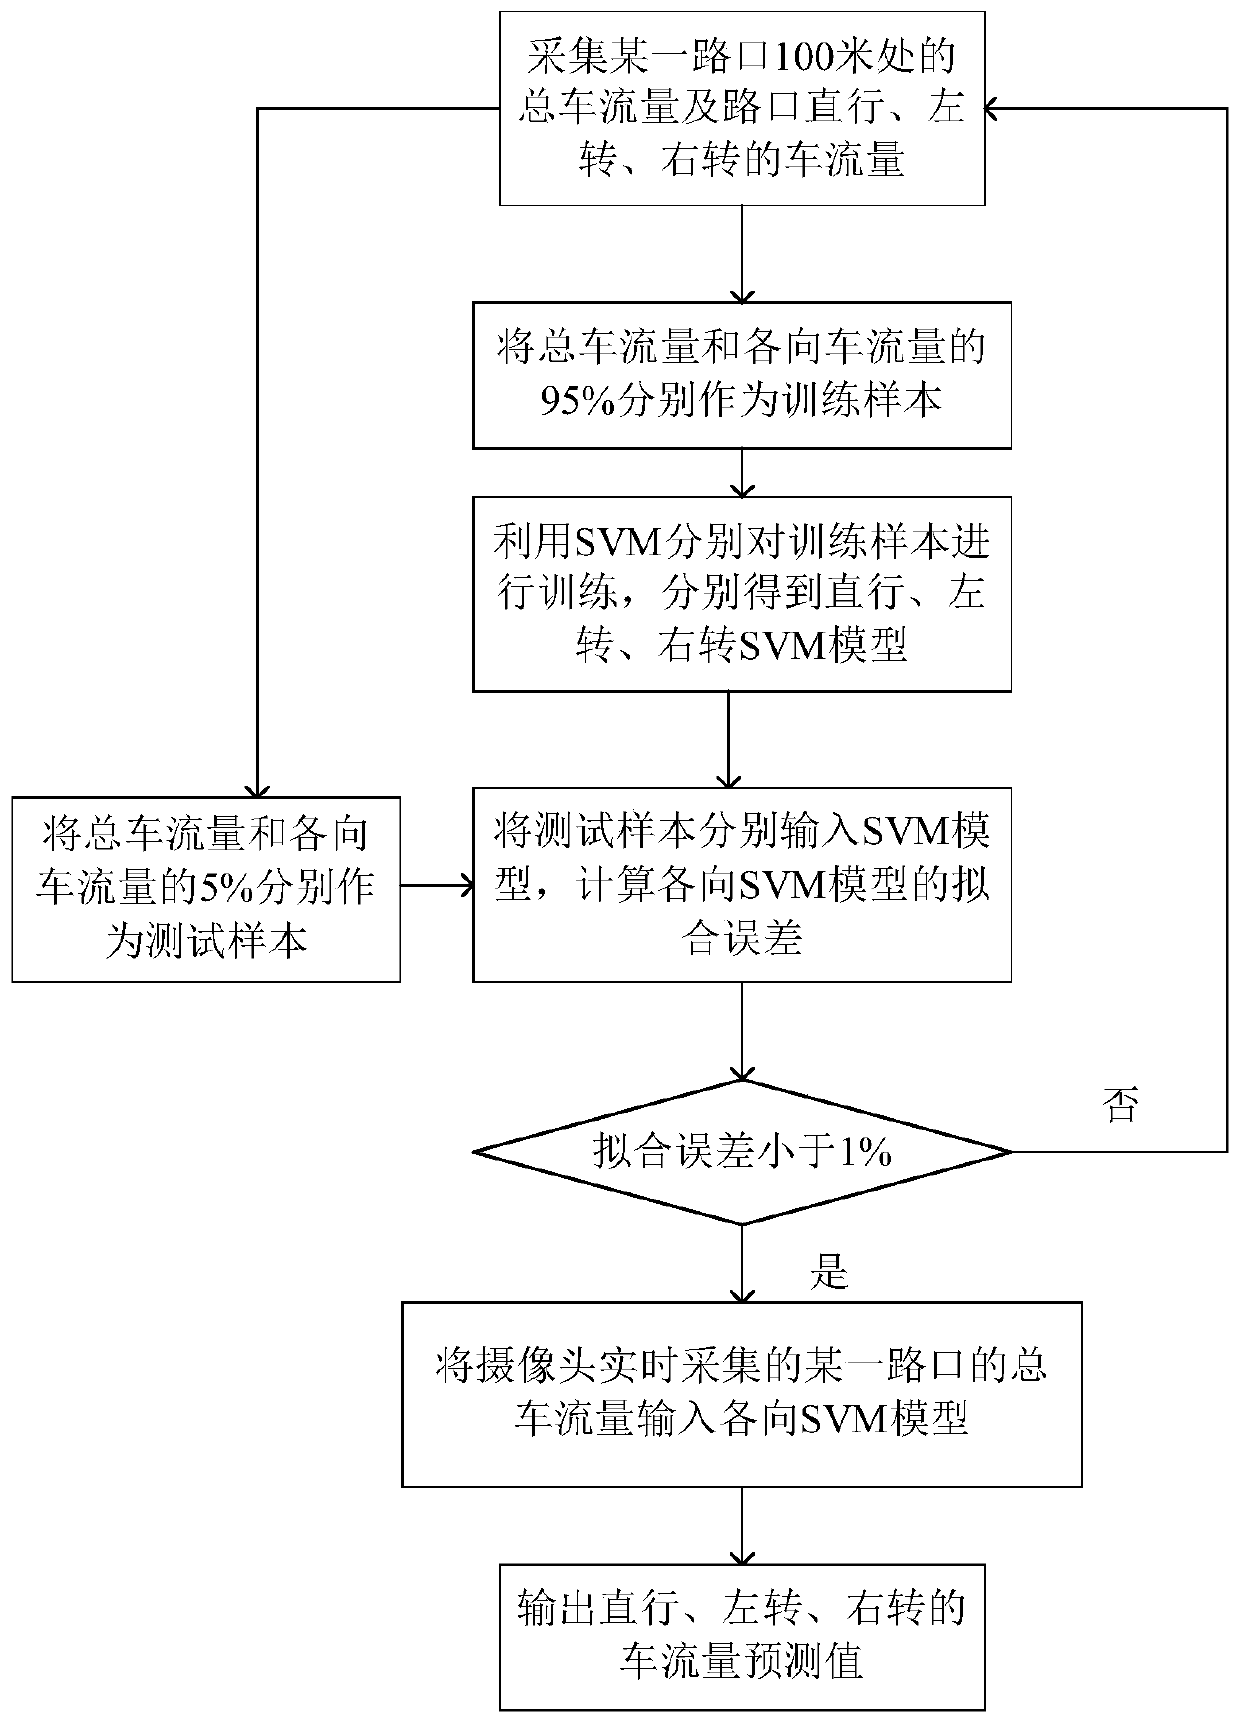 Traffic signal control method based on SVM and computer network and control system